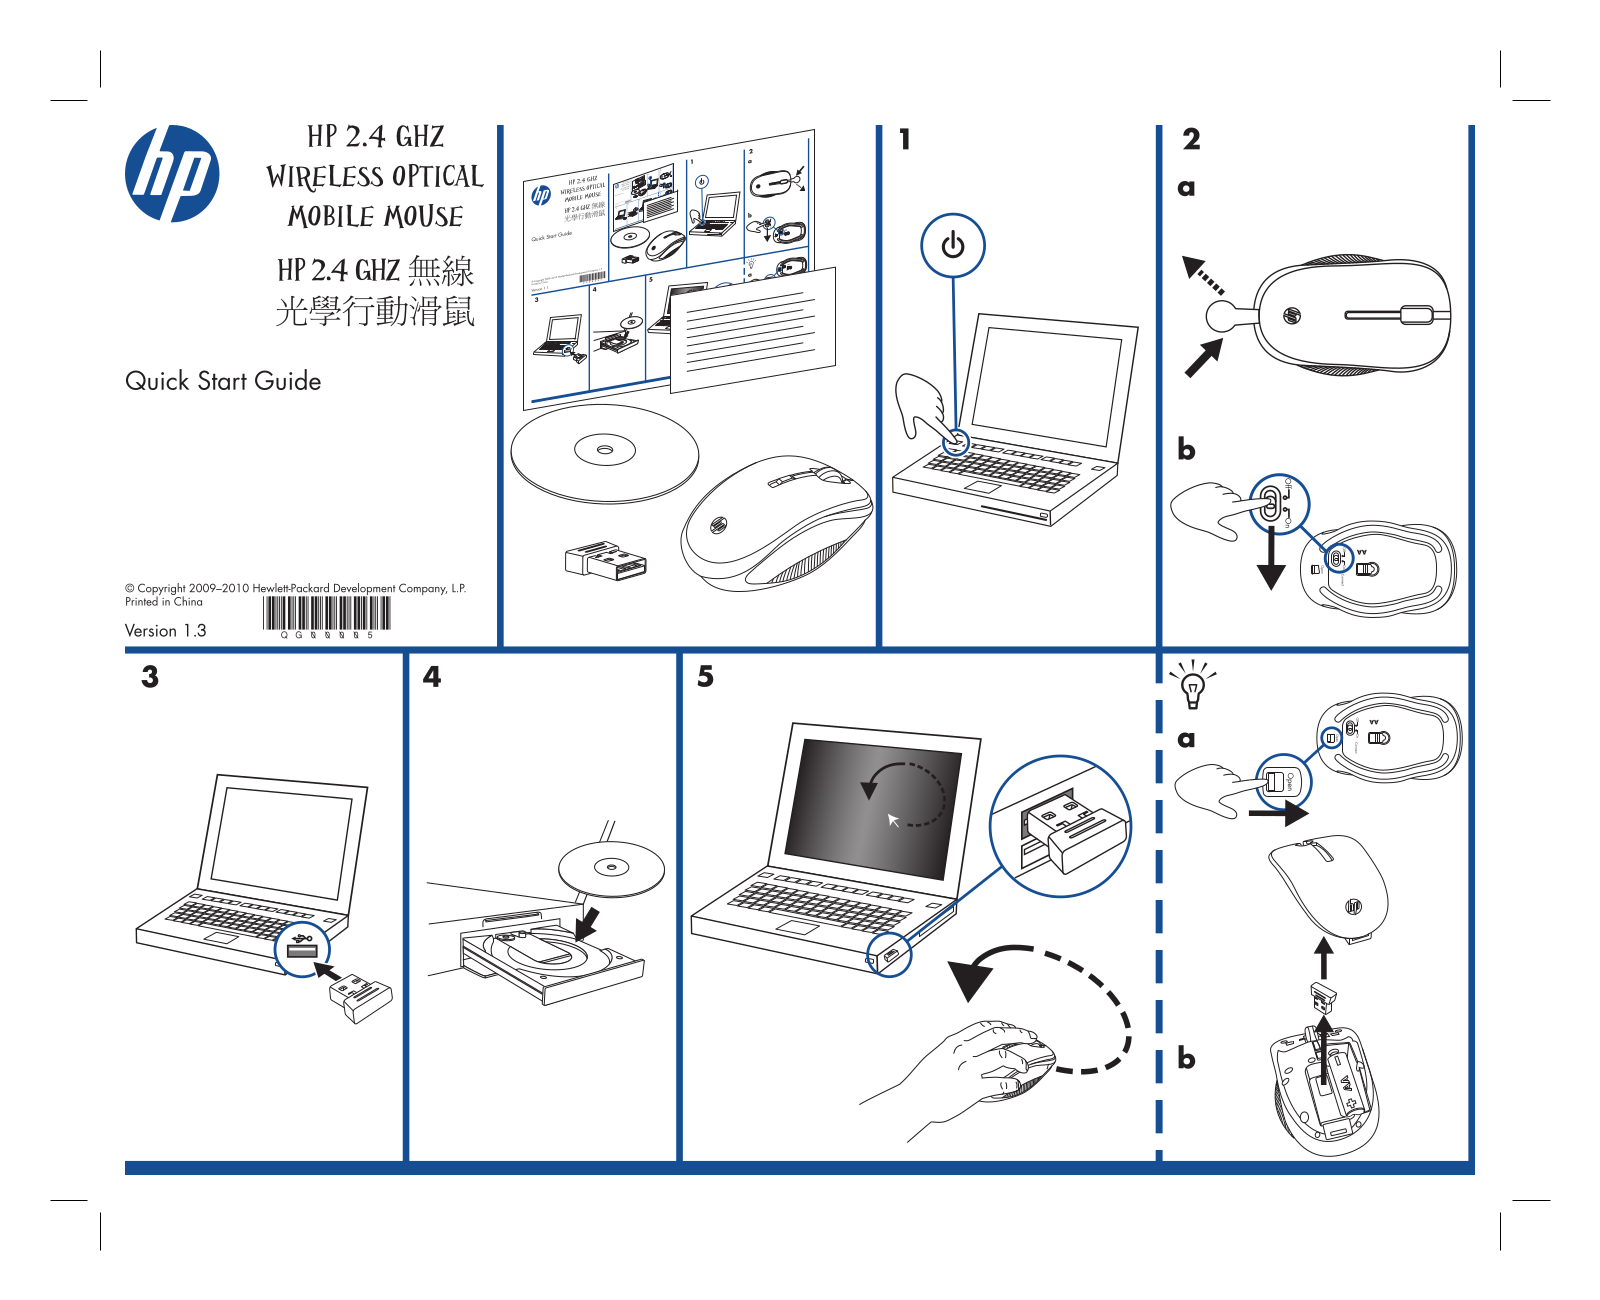 HP 2.4GHz Wireless Optical Mobile Mouse User Manual